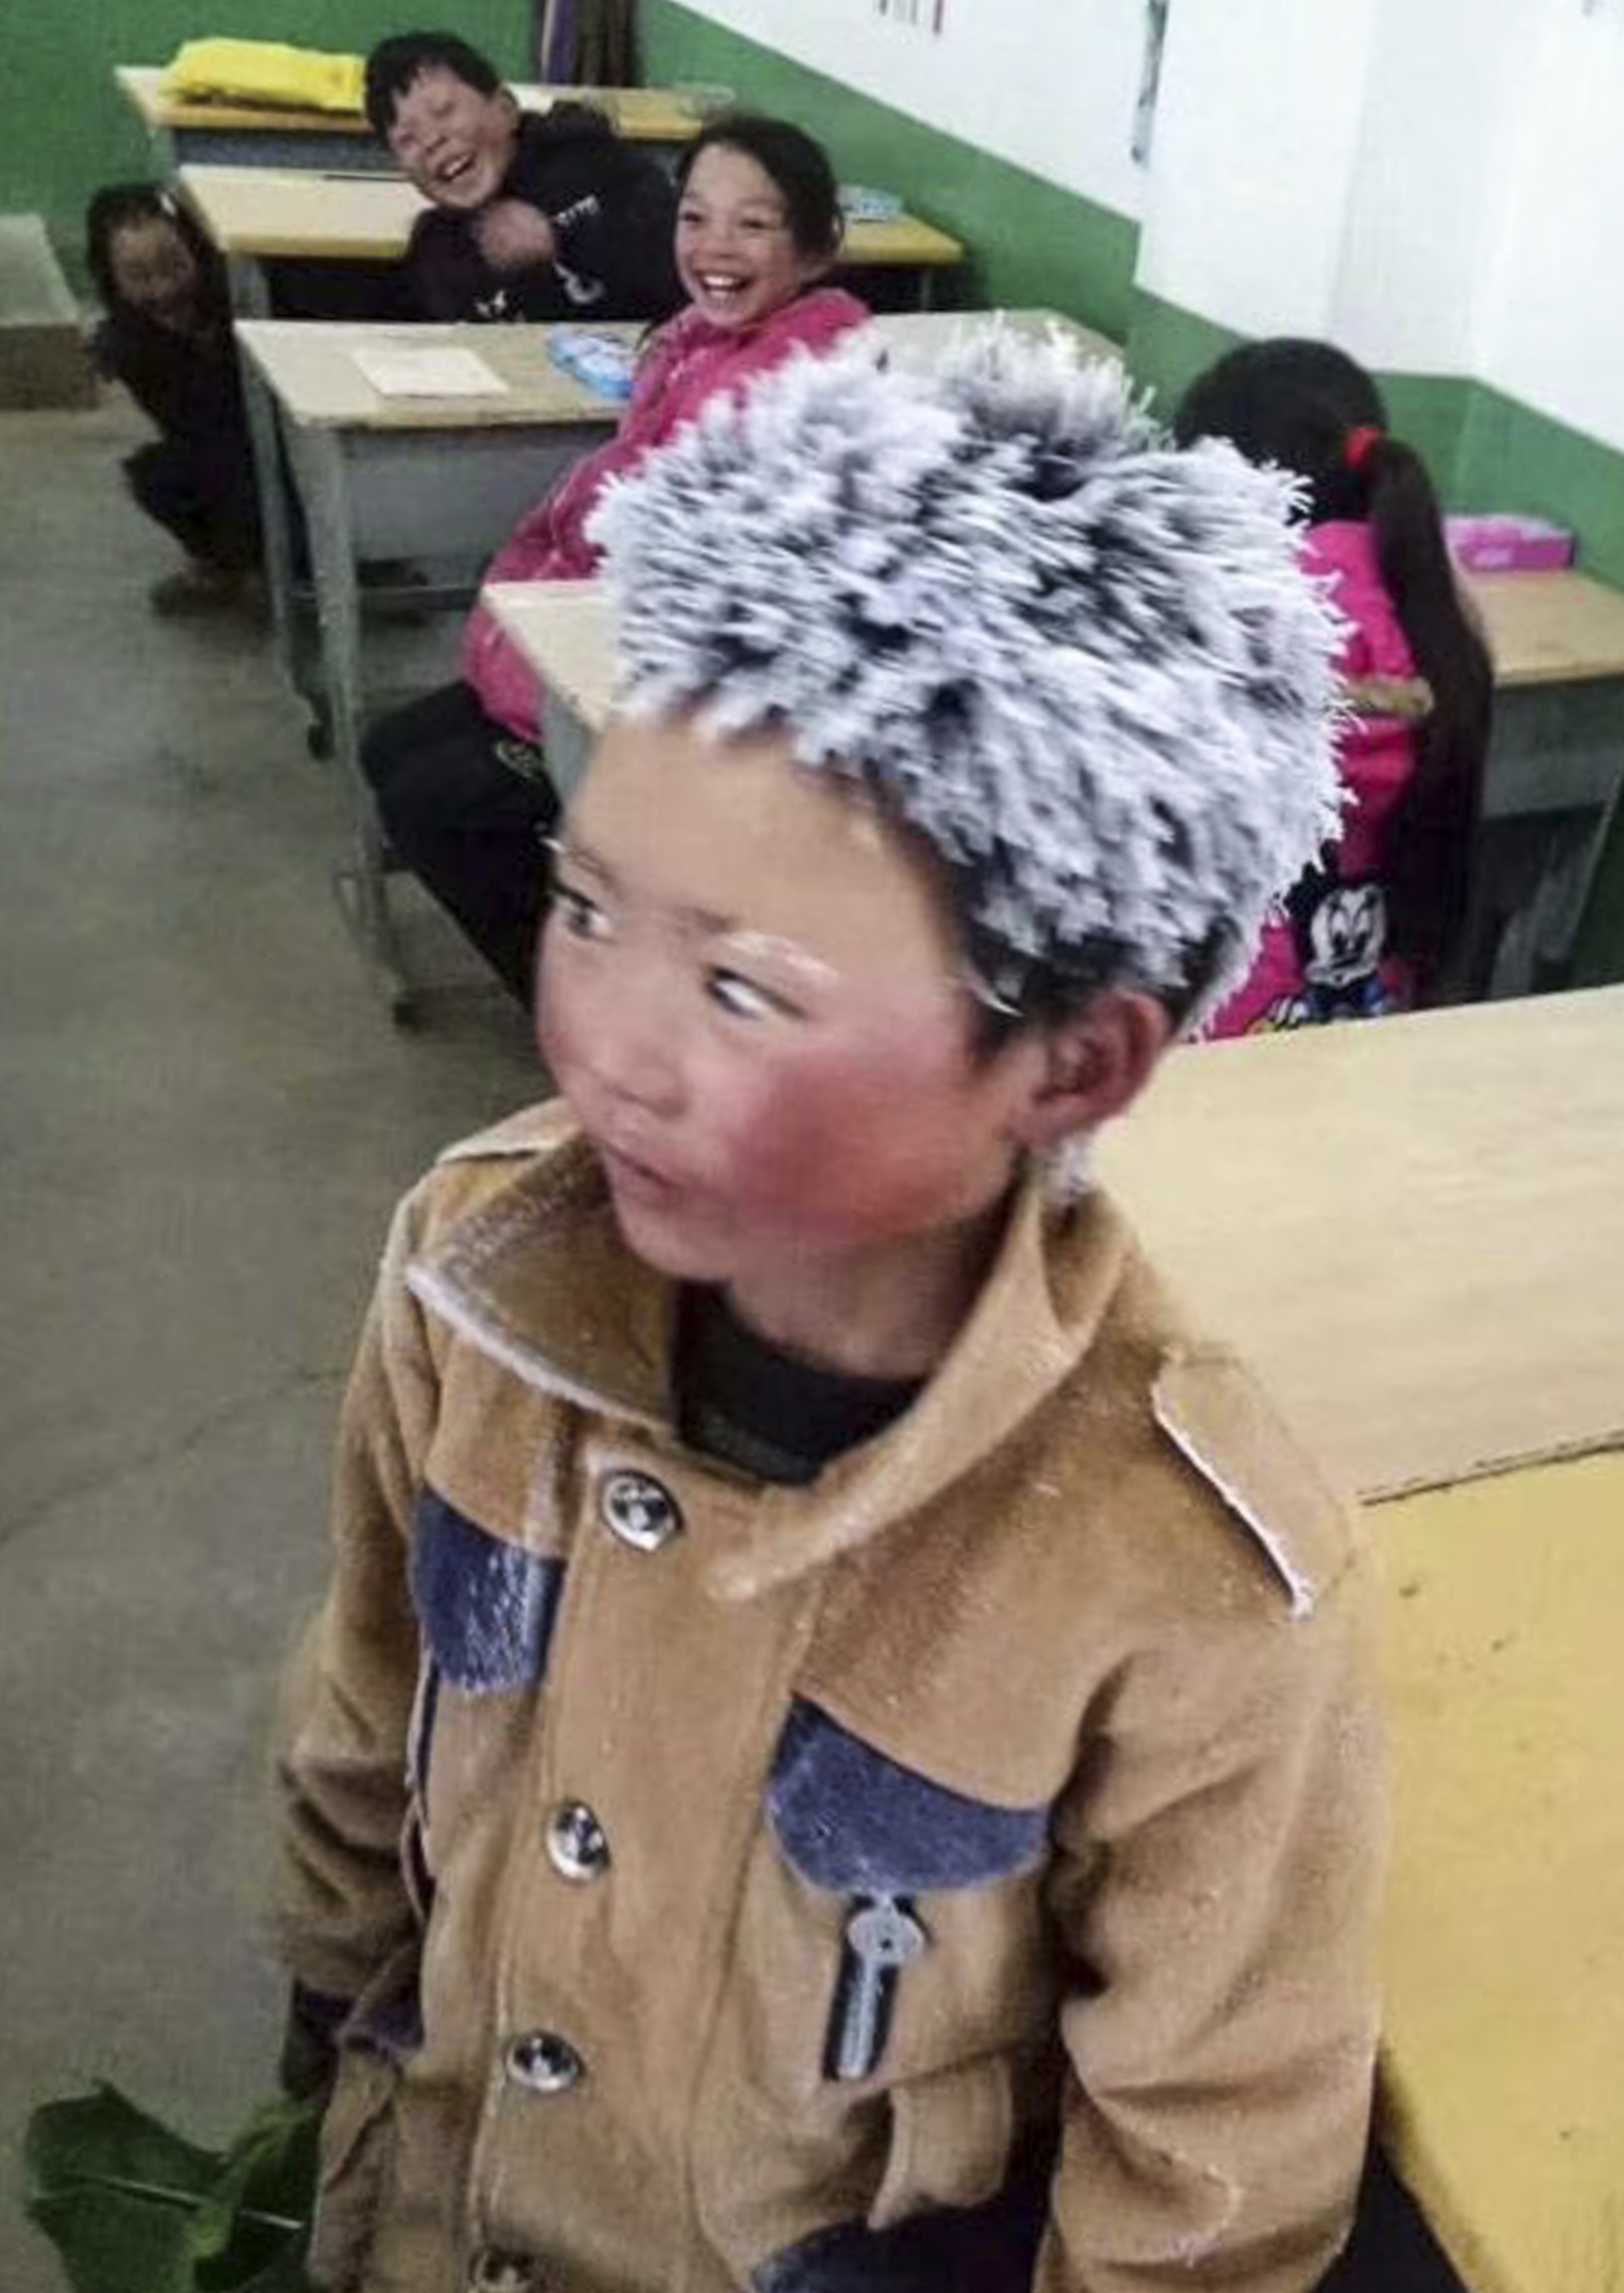 The photograph of the boy that touched many people in China. Photo: News.163.com